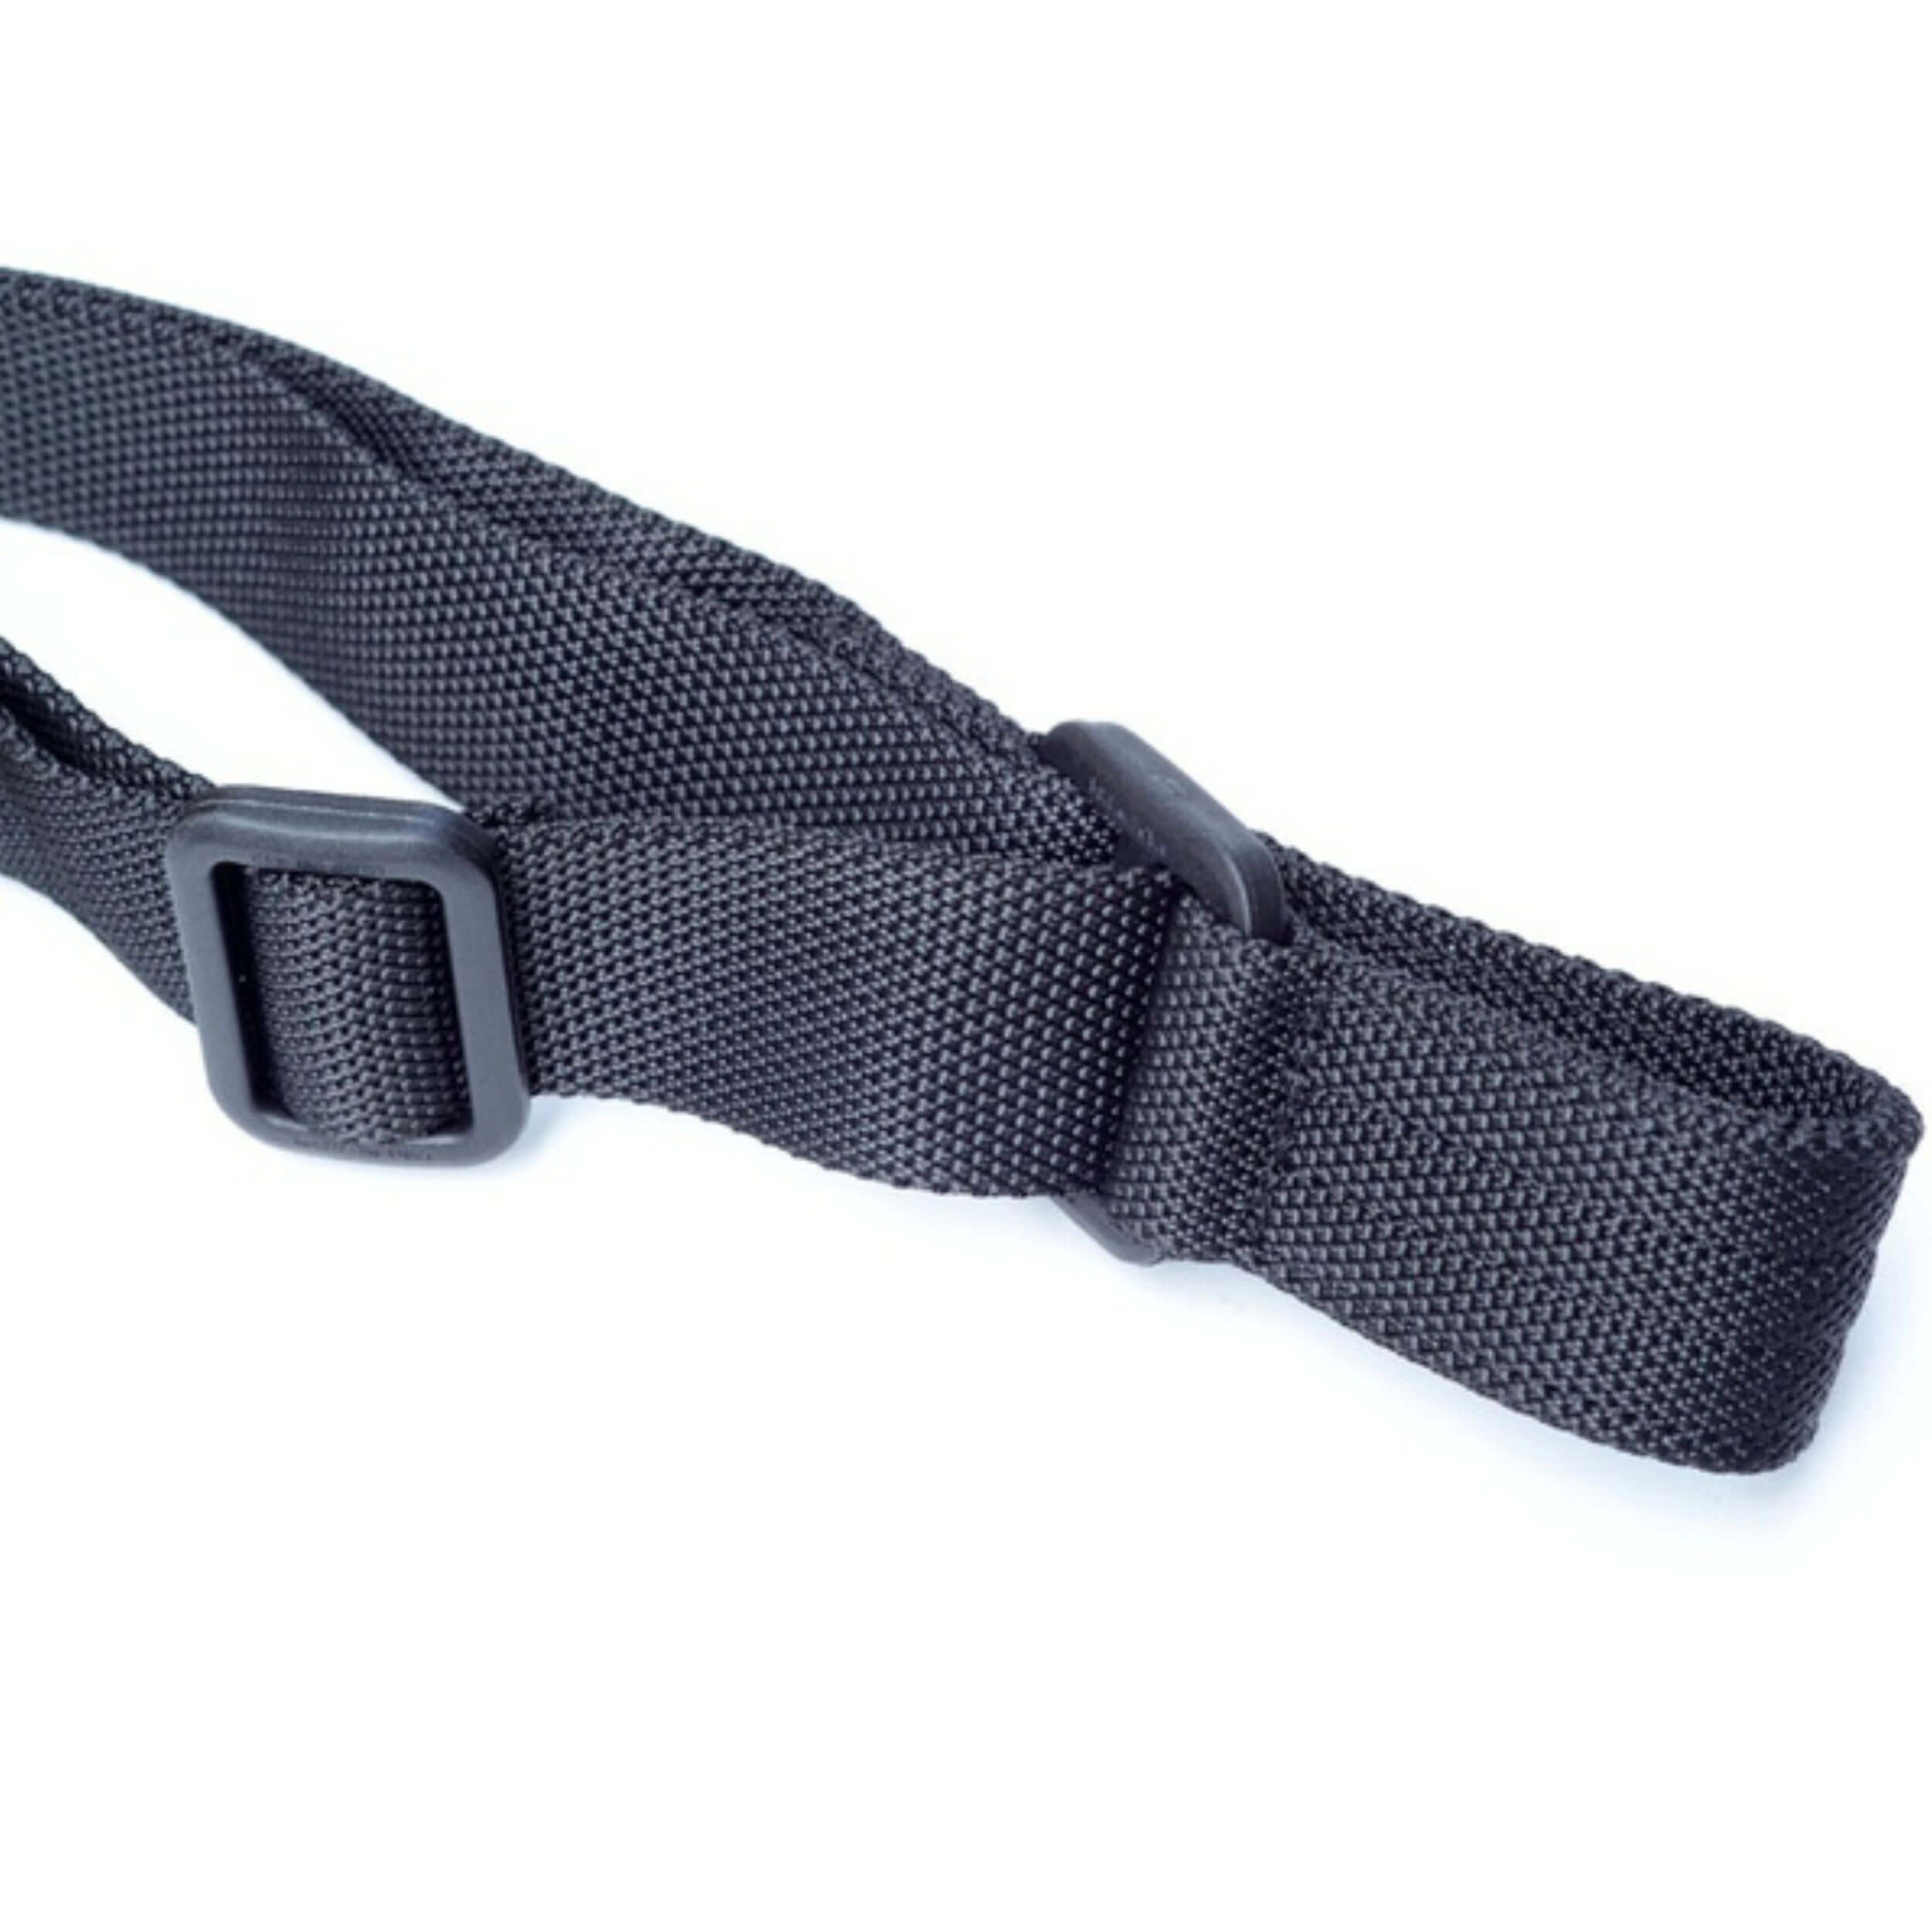 2 Point Tactical Rifle Sling